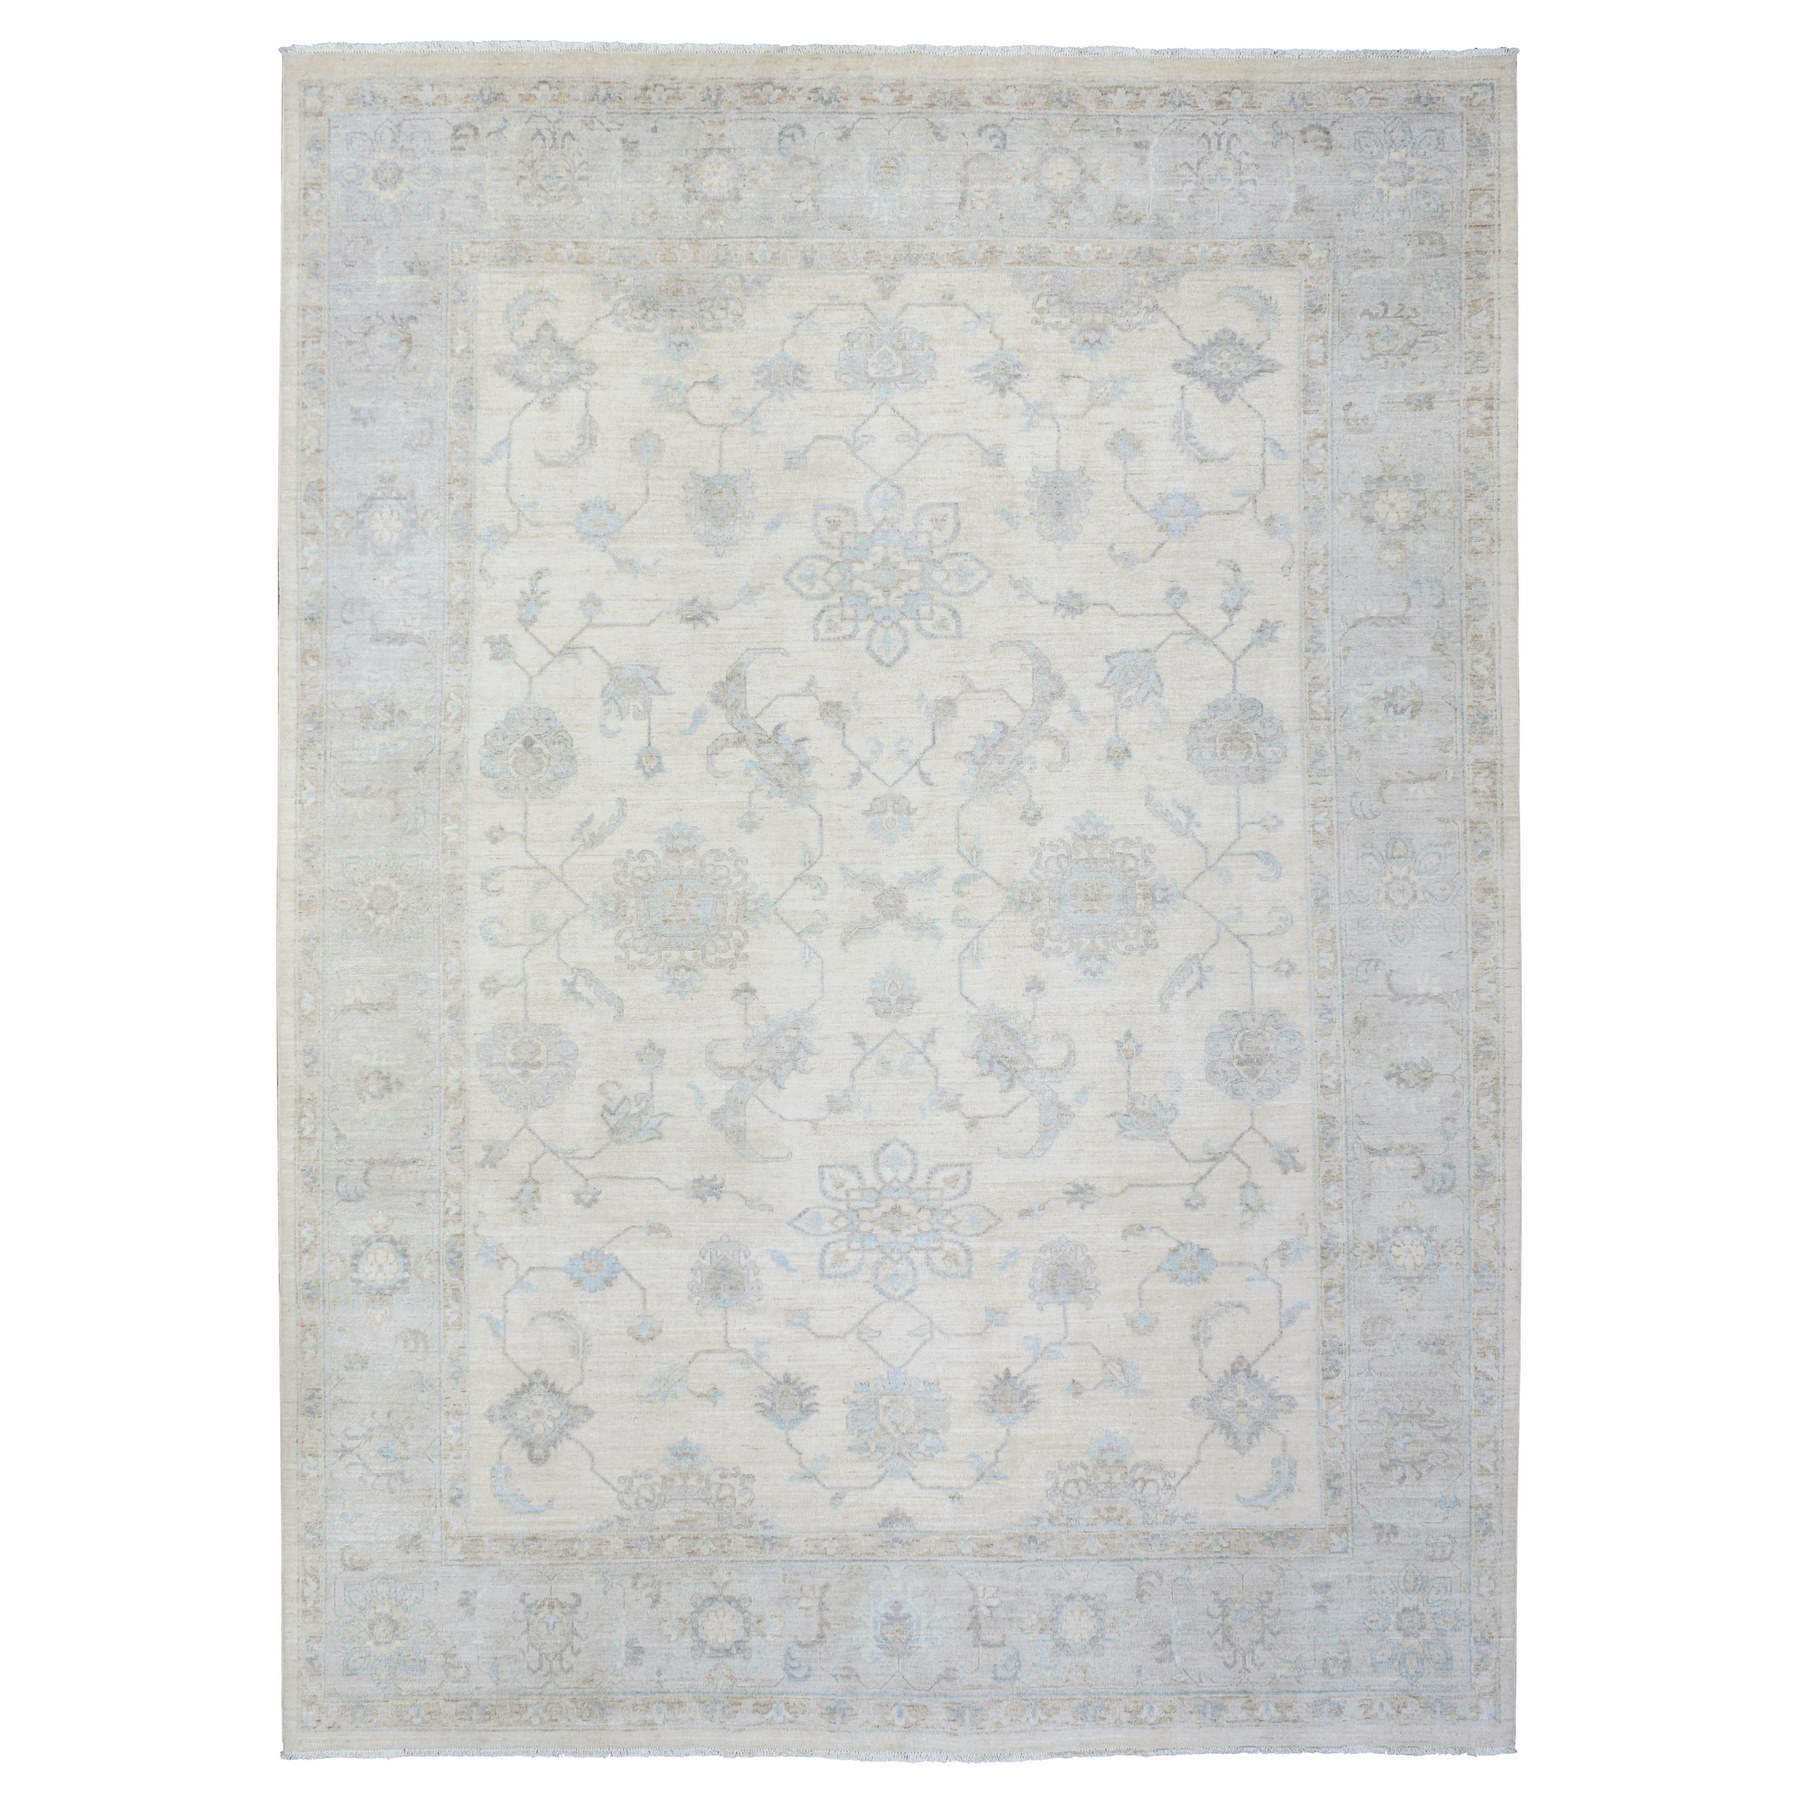 8'10"x11'7" Ivory, All Over Peshawar Antique Mahal Design Natural Dyes, Soft and Shiny Wool Hand Woven, Oriental Rug 